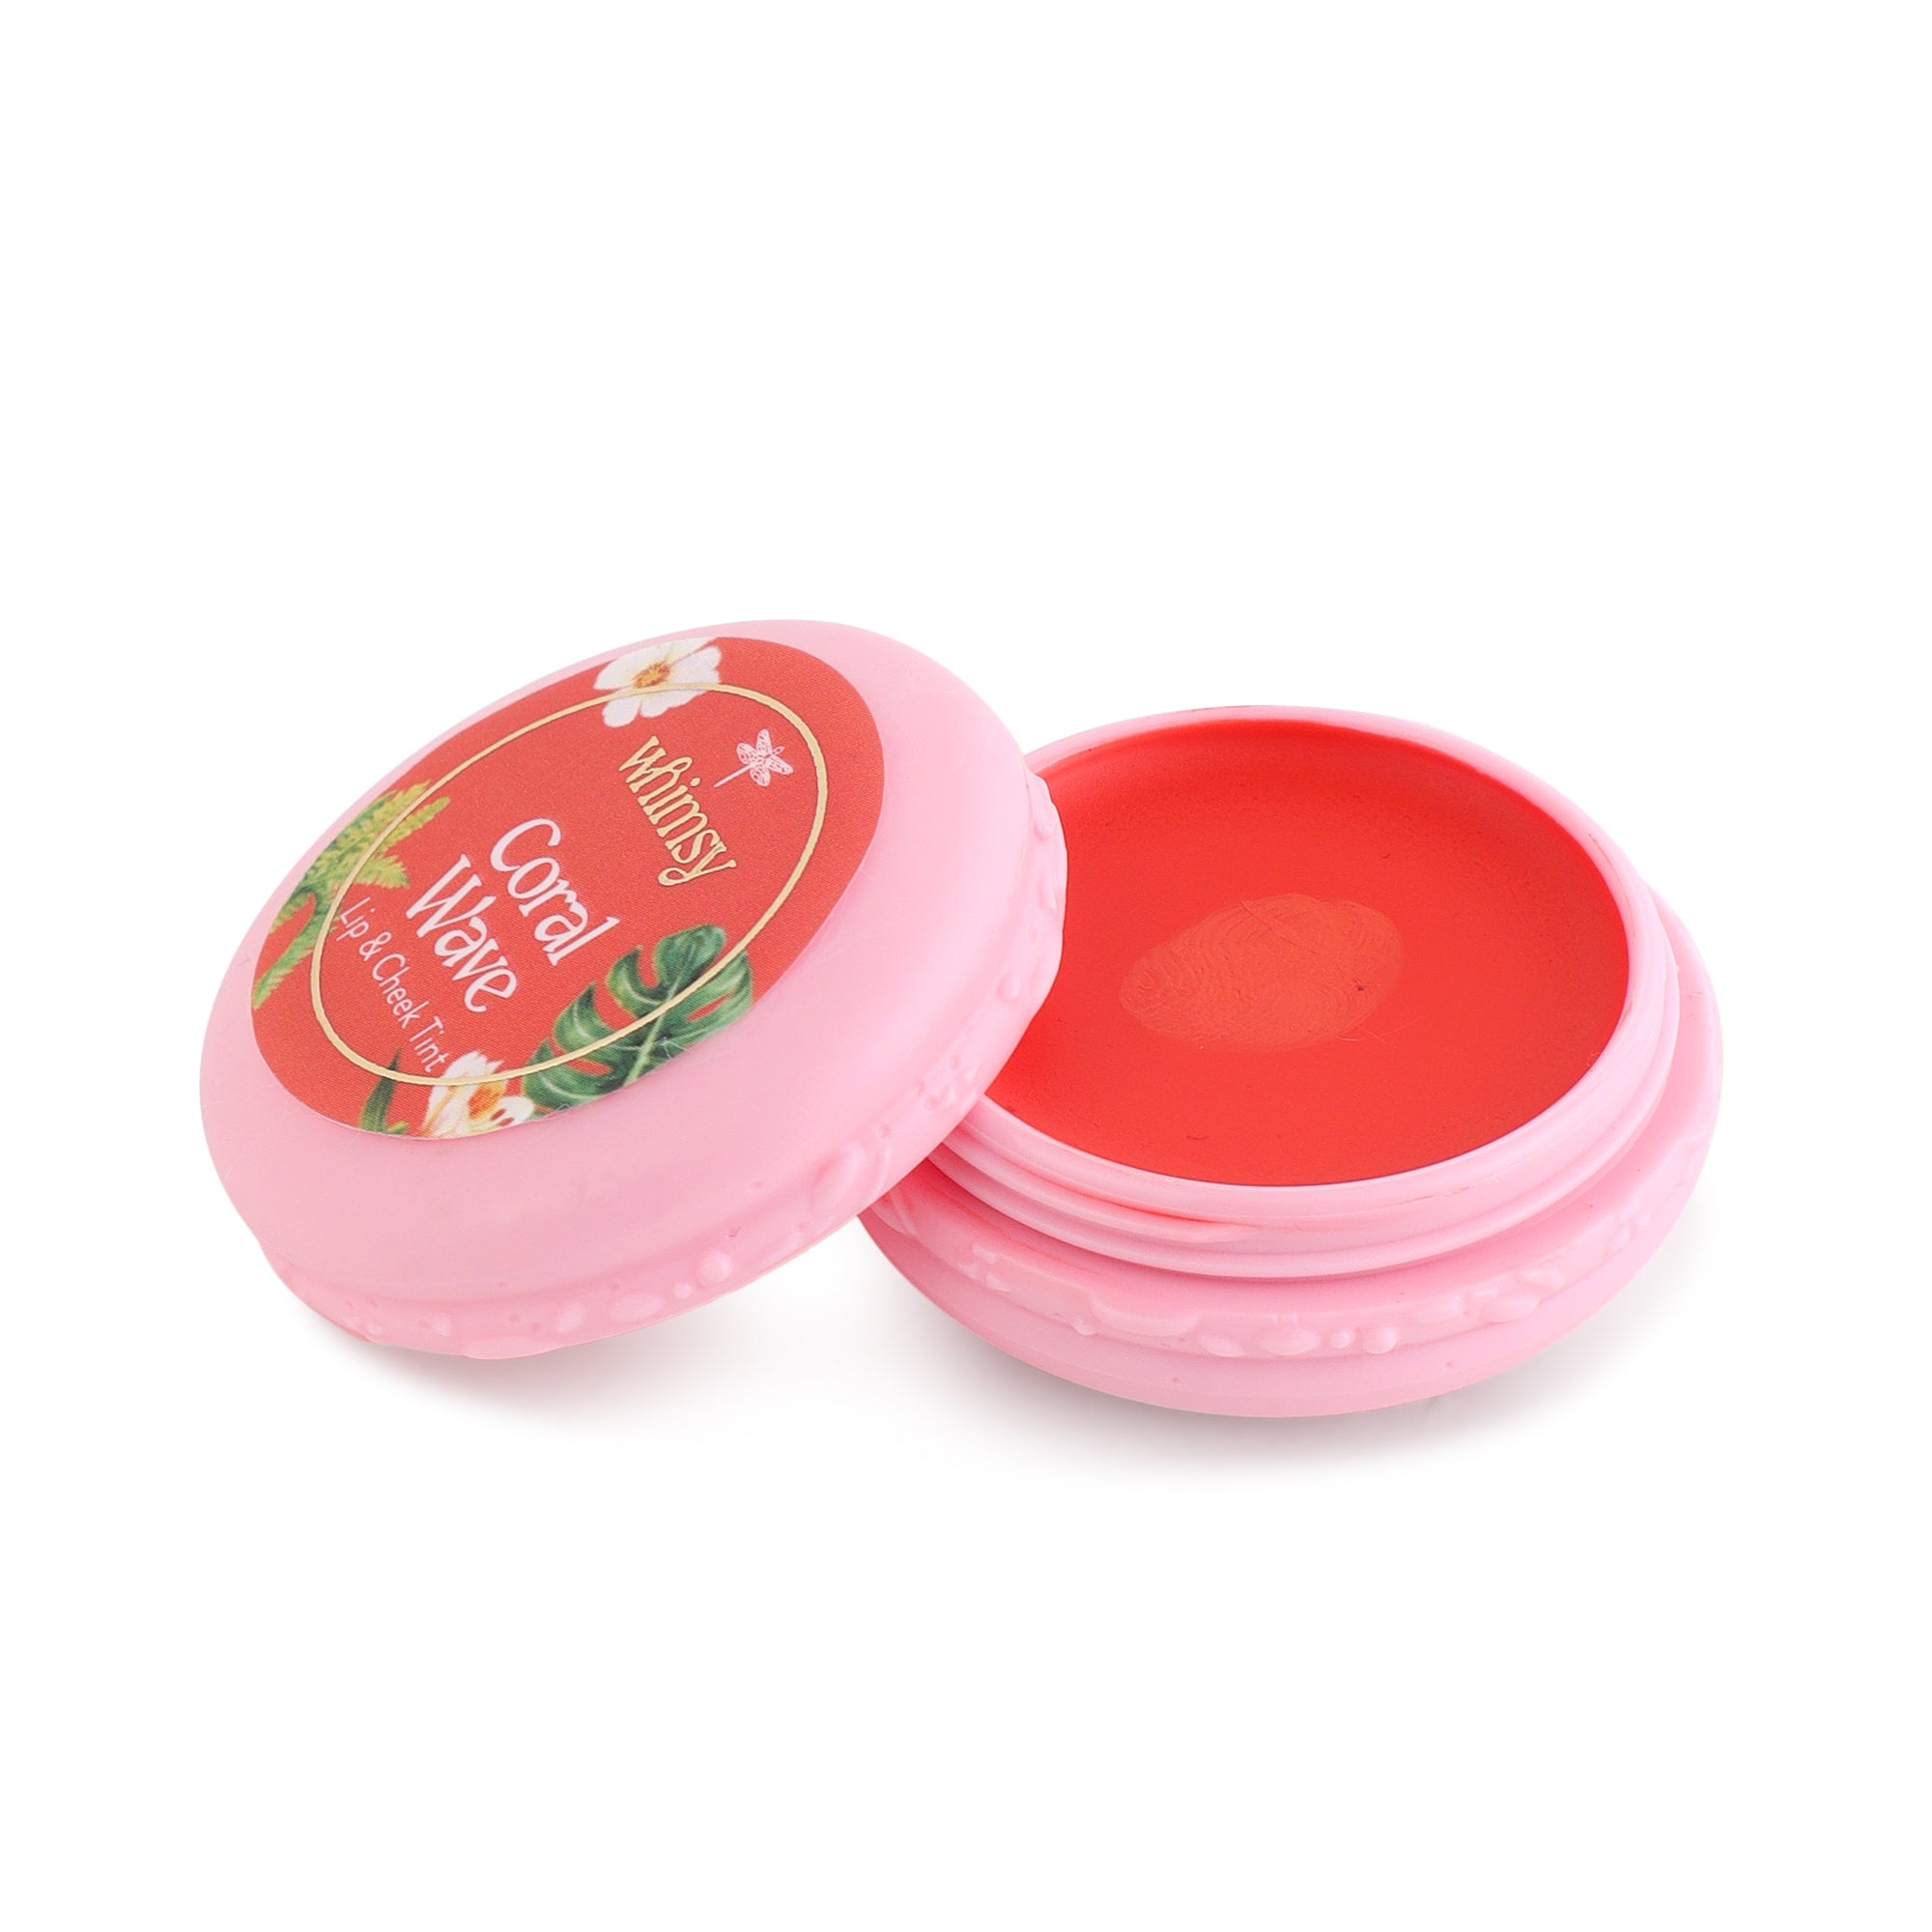 Combo of - Gloss ‘N’ Go - Lip Gloss and Coral Wave - Lip & Cheek Tint For Teens